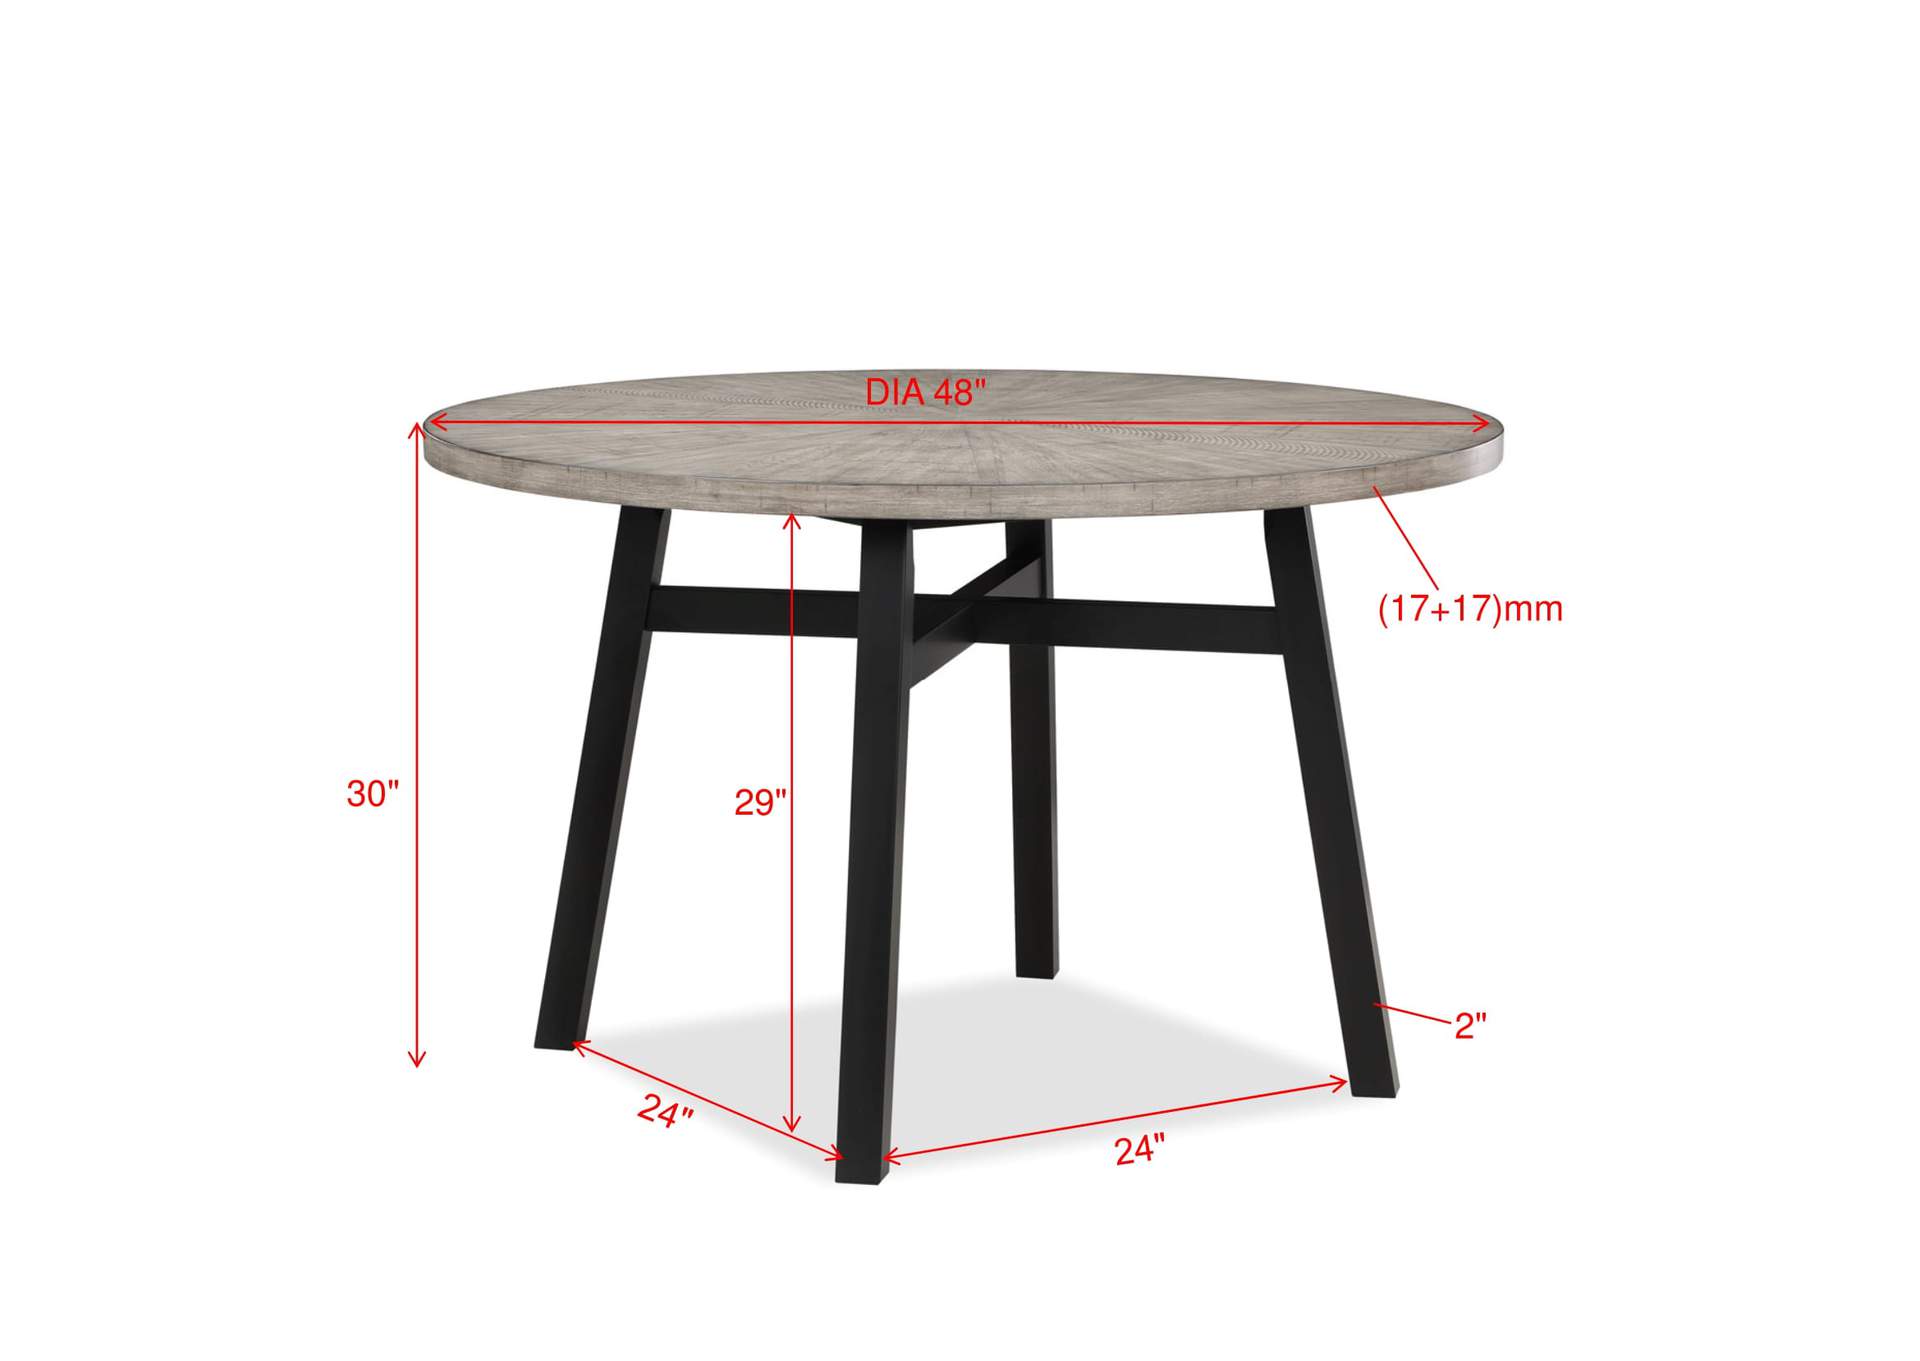 Mathis Dining Table,Crown Mark